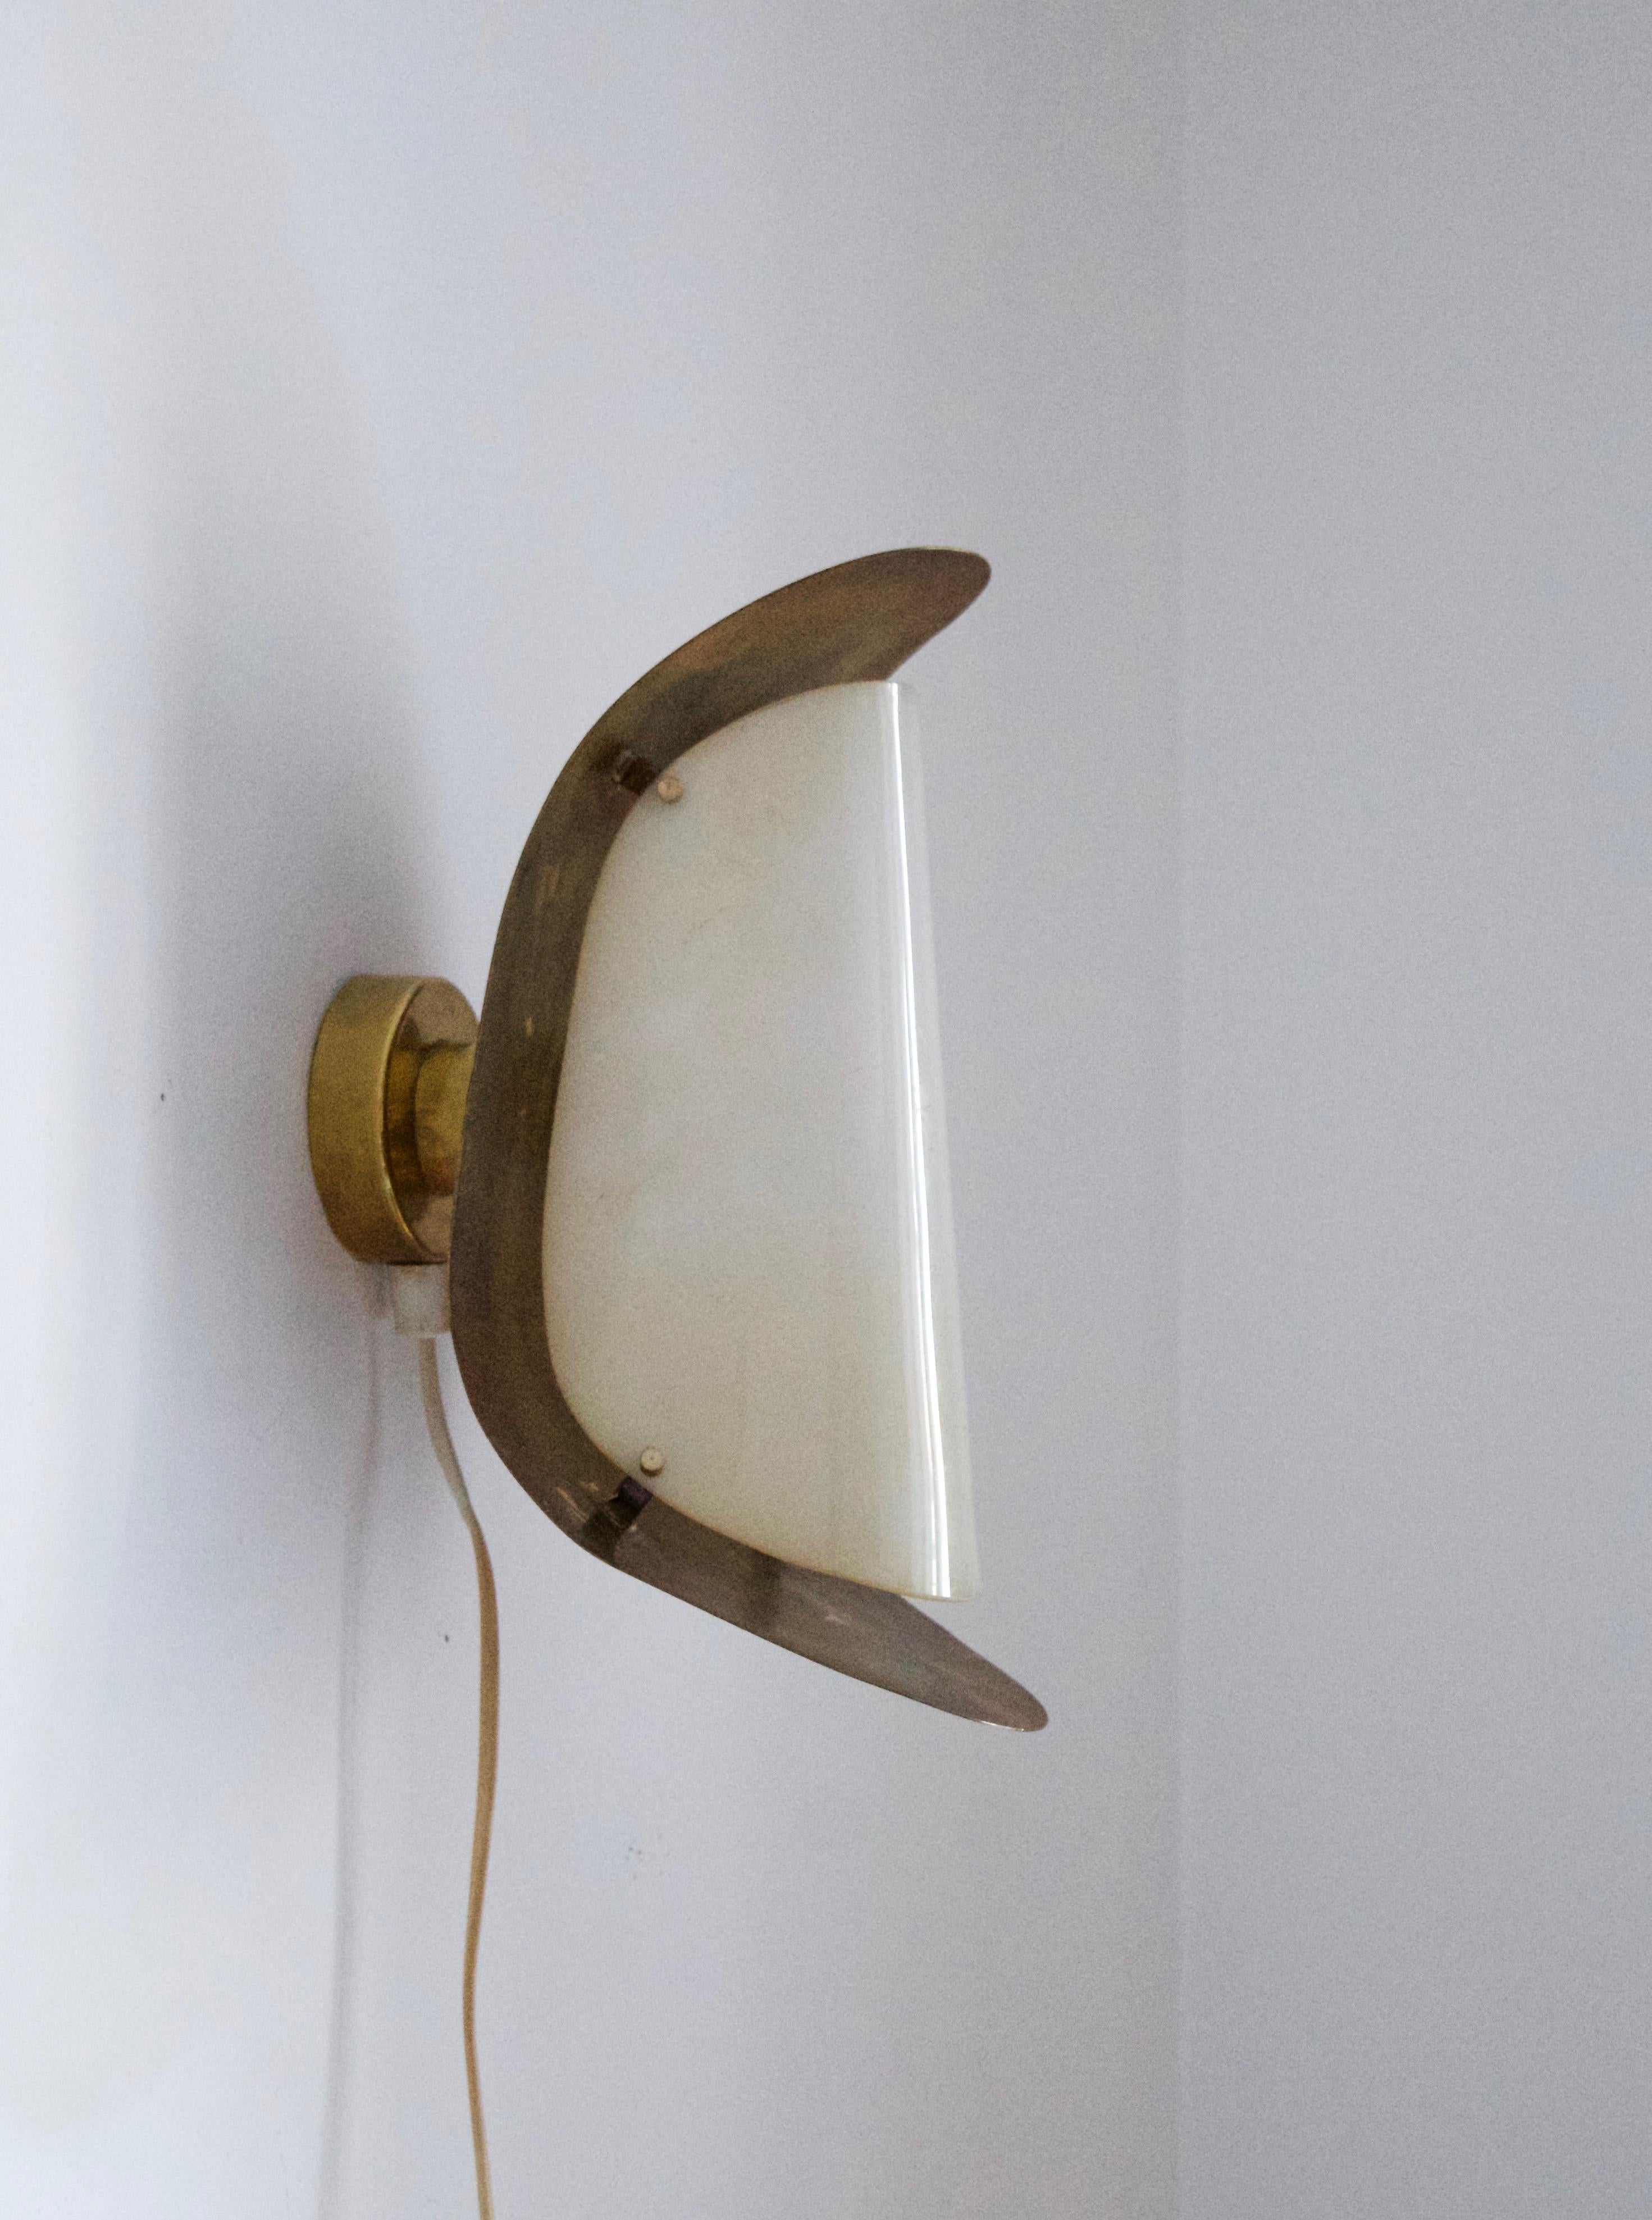 A wall light / Sconce. Designed and produced in Italy, 1950s-1960s.

Other designers of the period include Paavo Tynell, Jean Royère, Hans Bergström, Hans-Agne Jakobsson, and Kaare Klint.